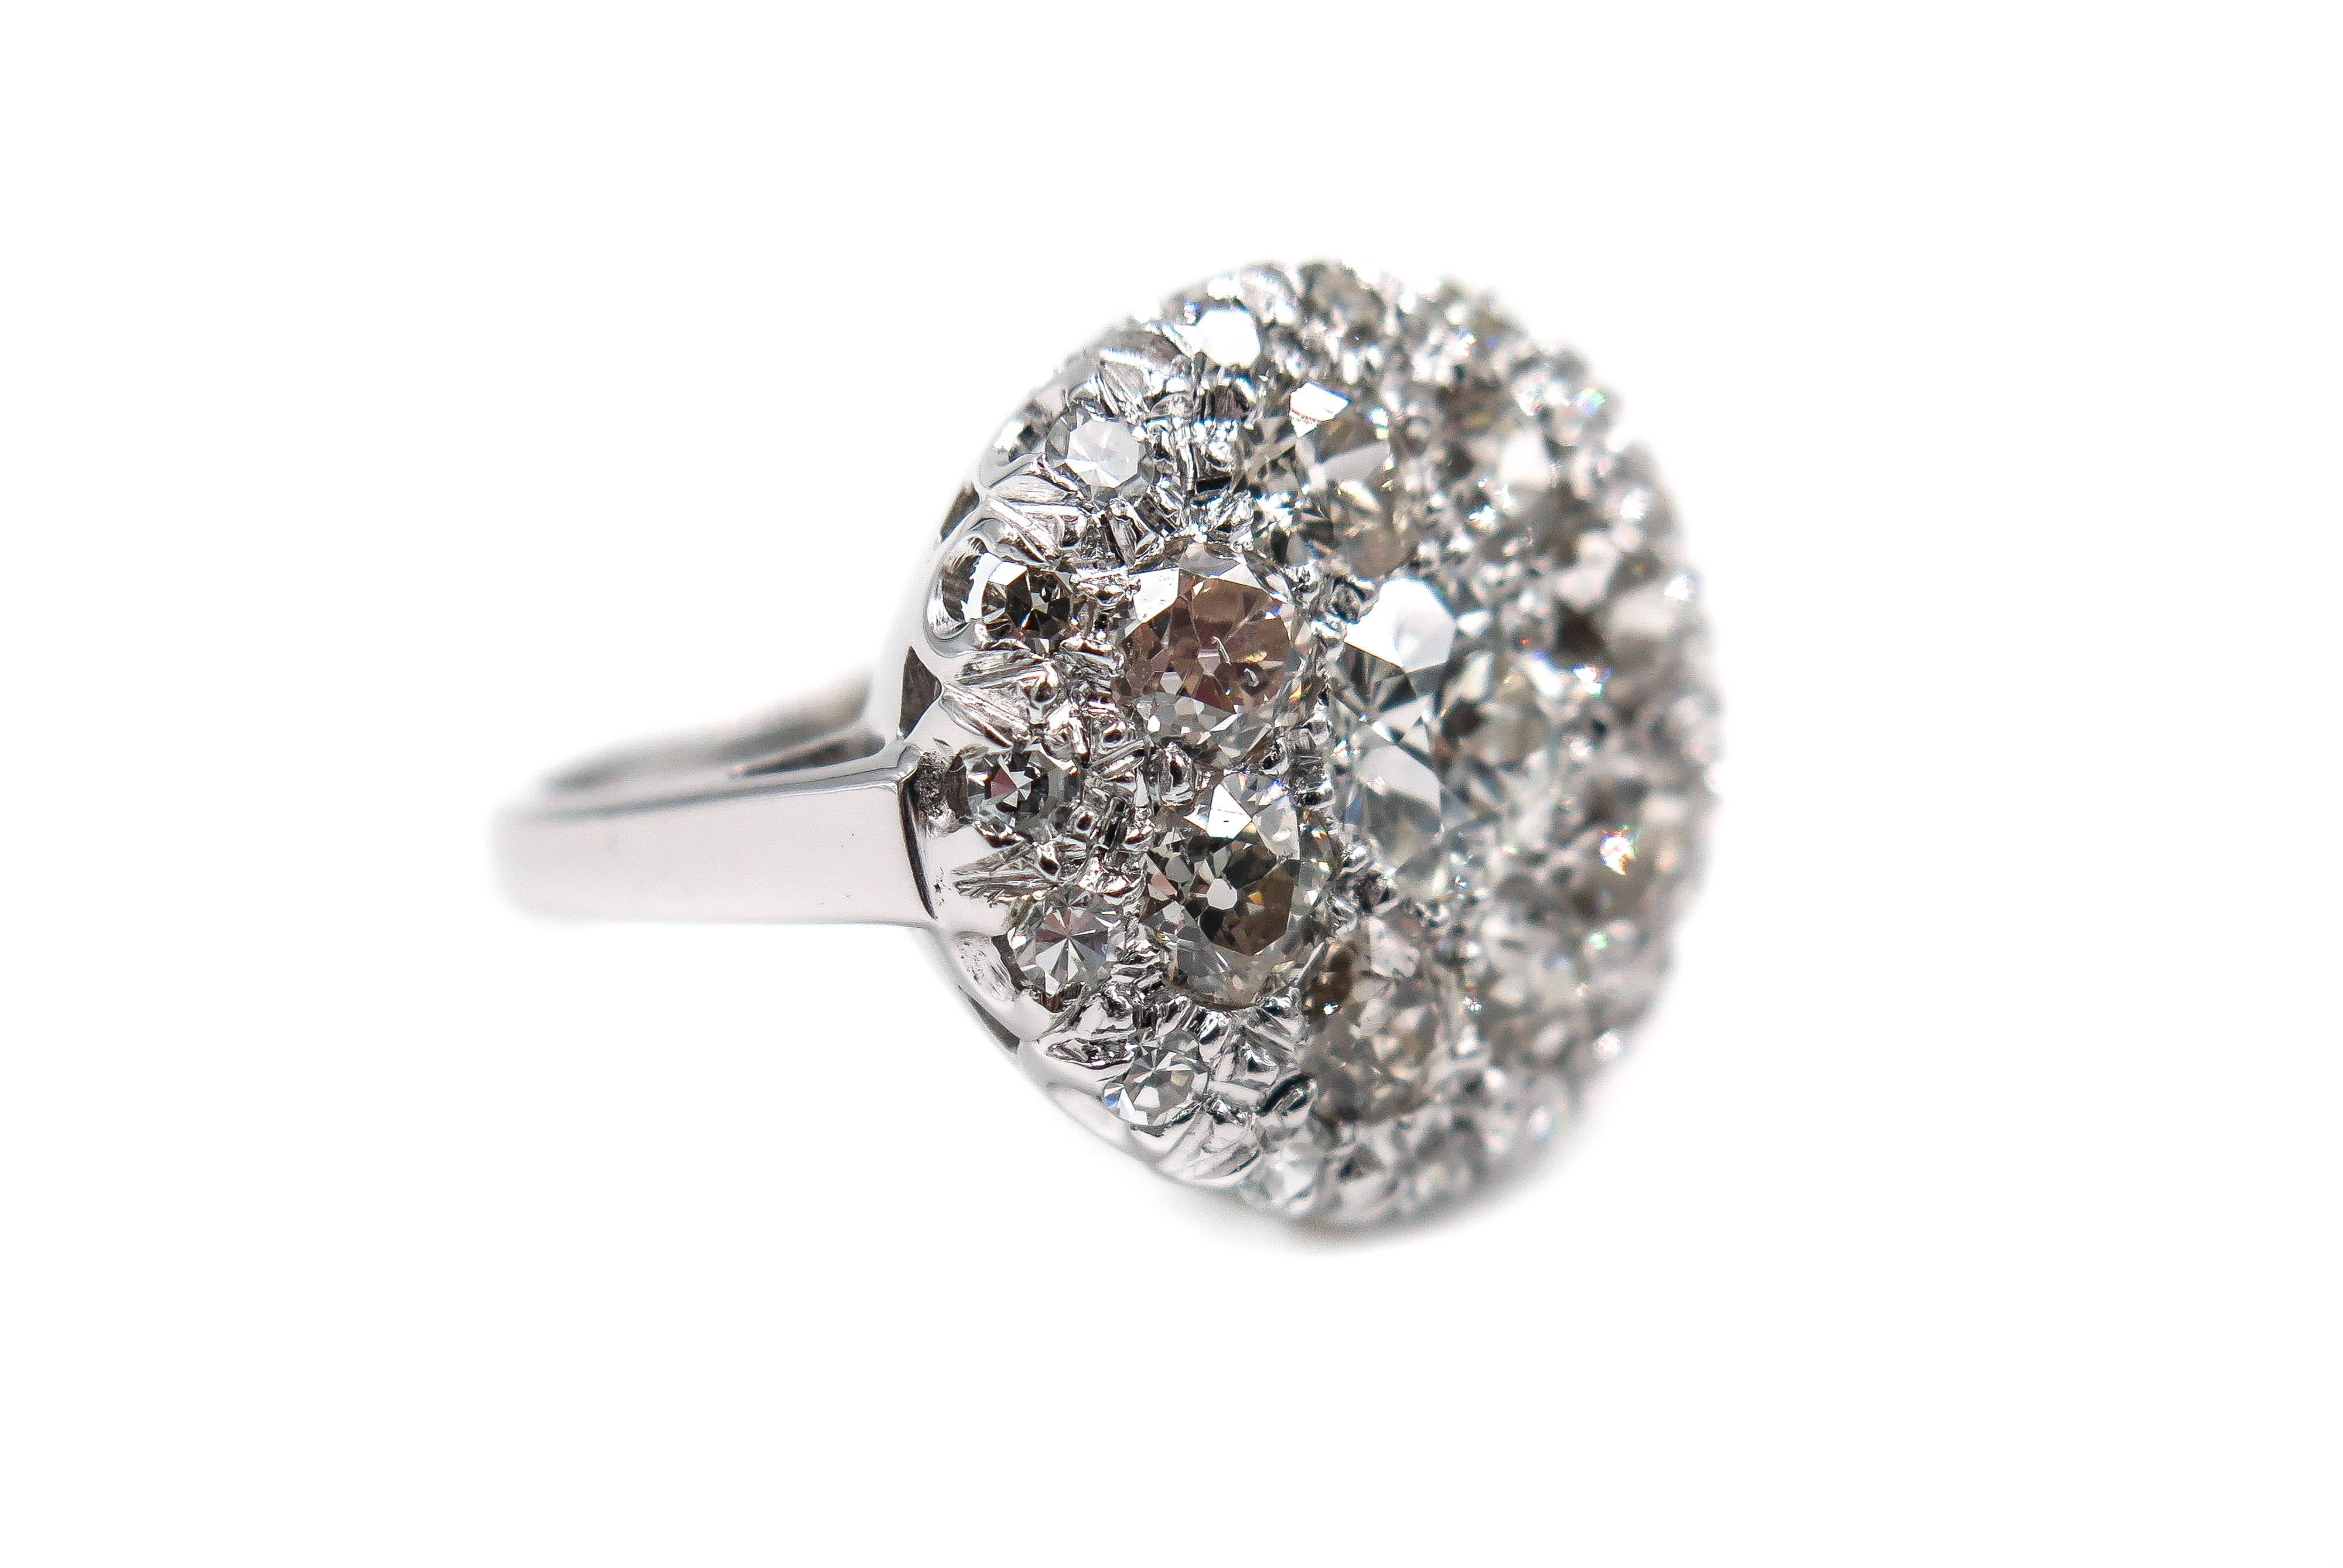 This gorgeous estate diamond ring makes a great complement to other pieces of jewelry from your collection or can be simply worn as an elegant cocktail ring.
The ring is comprised of a cluster of 1 carat total weight, H/I color diamonds, handcrafted